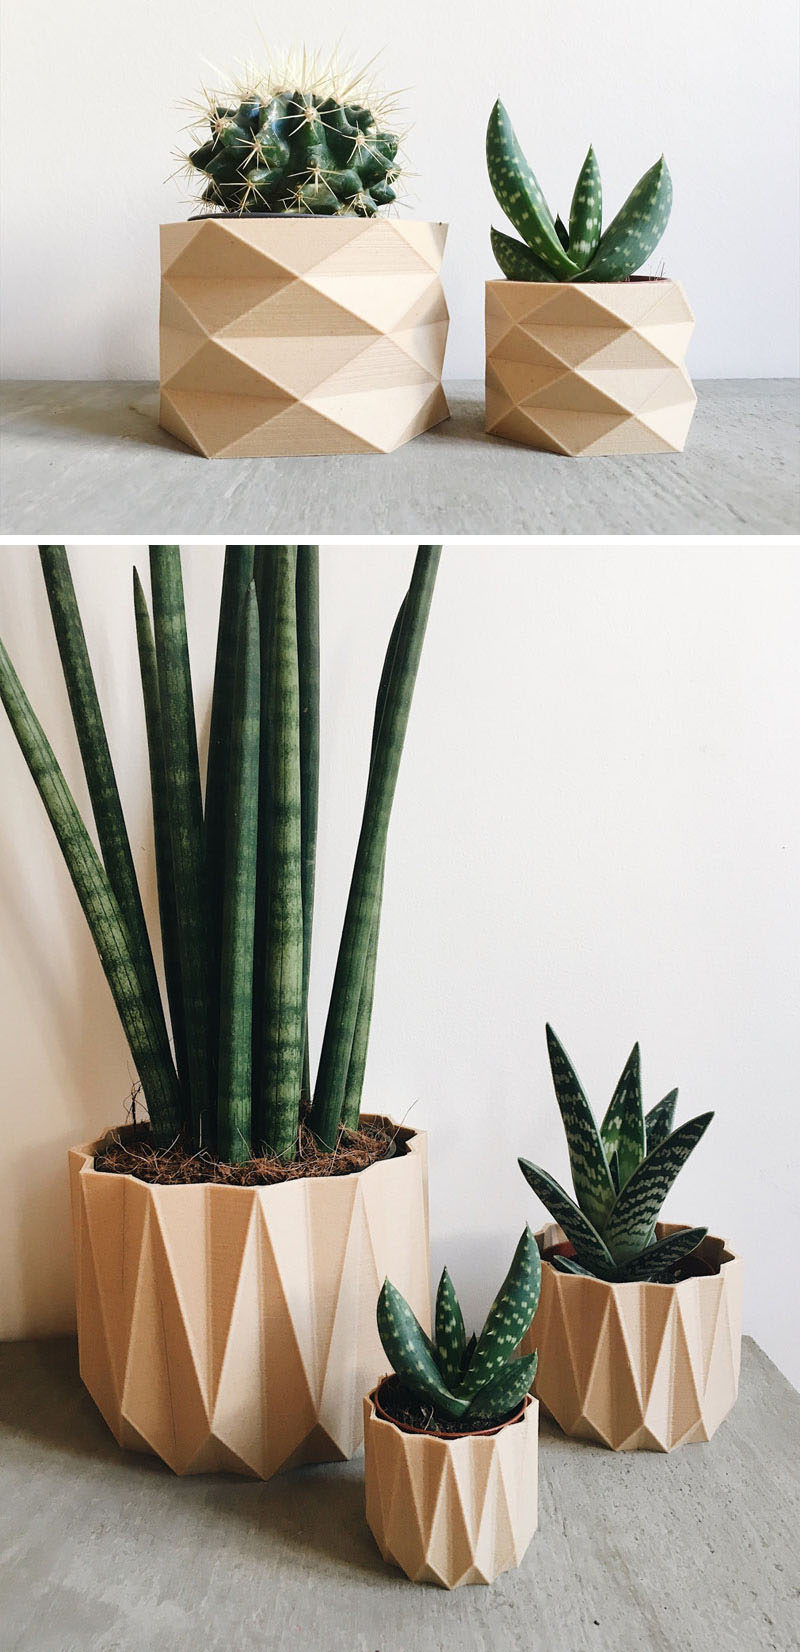 These modern and intricate geometric planters by Minimum Design are 3D printed products made from recycled wood fibers and bioplastic, making them biodegradable.